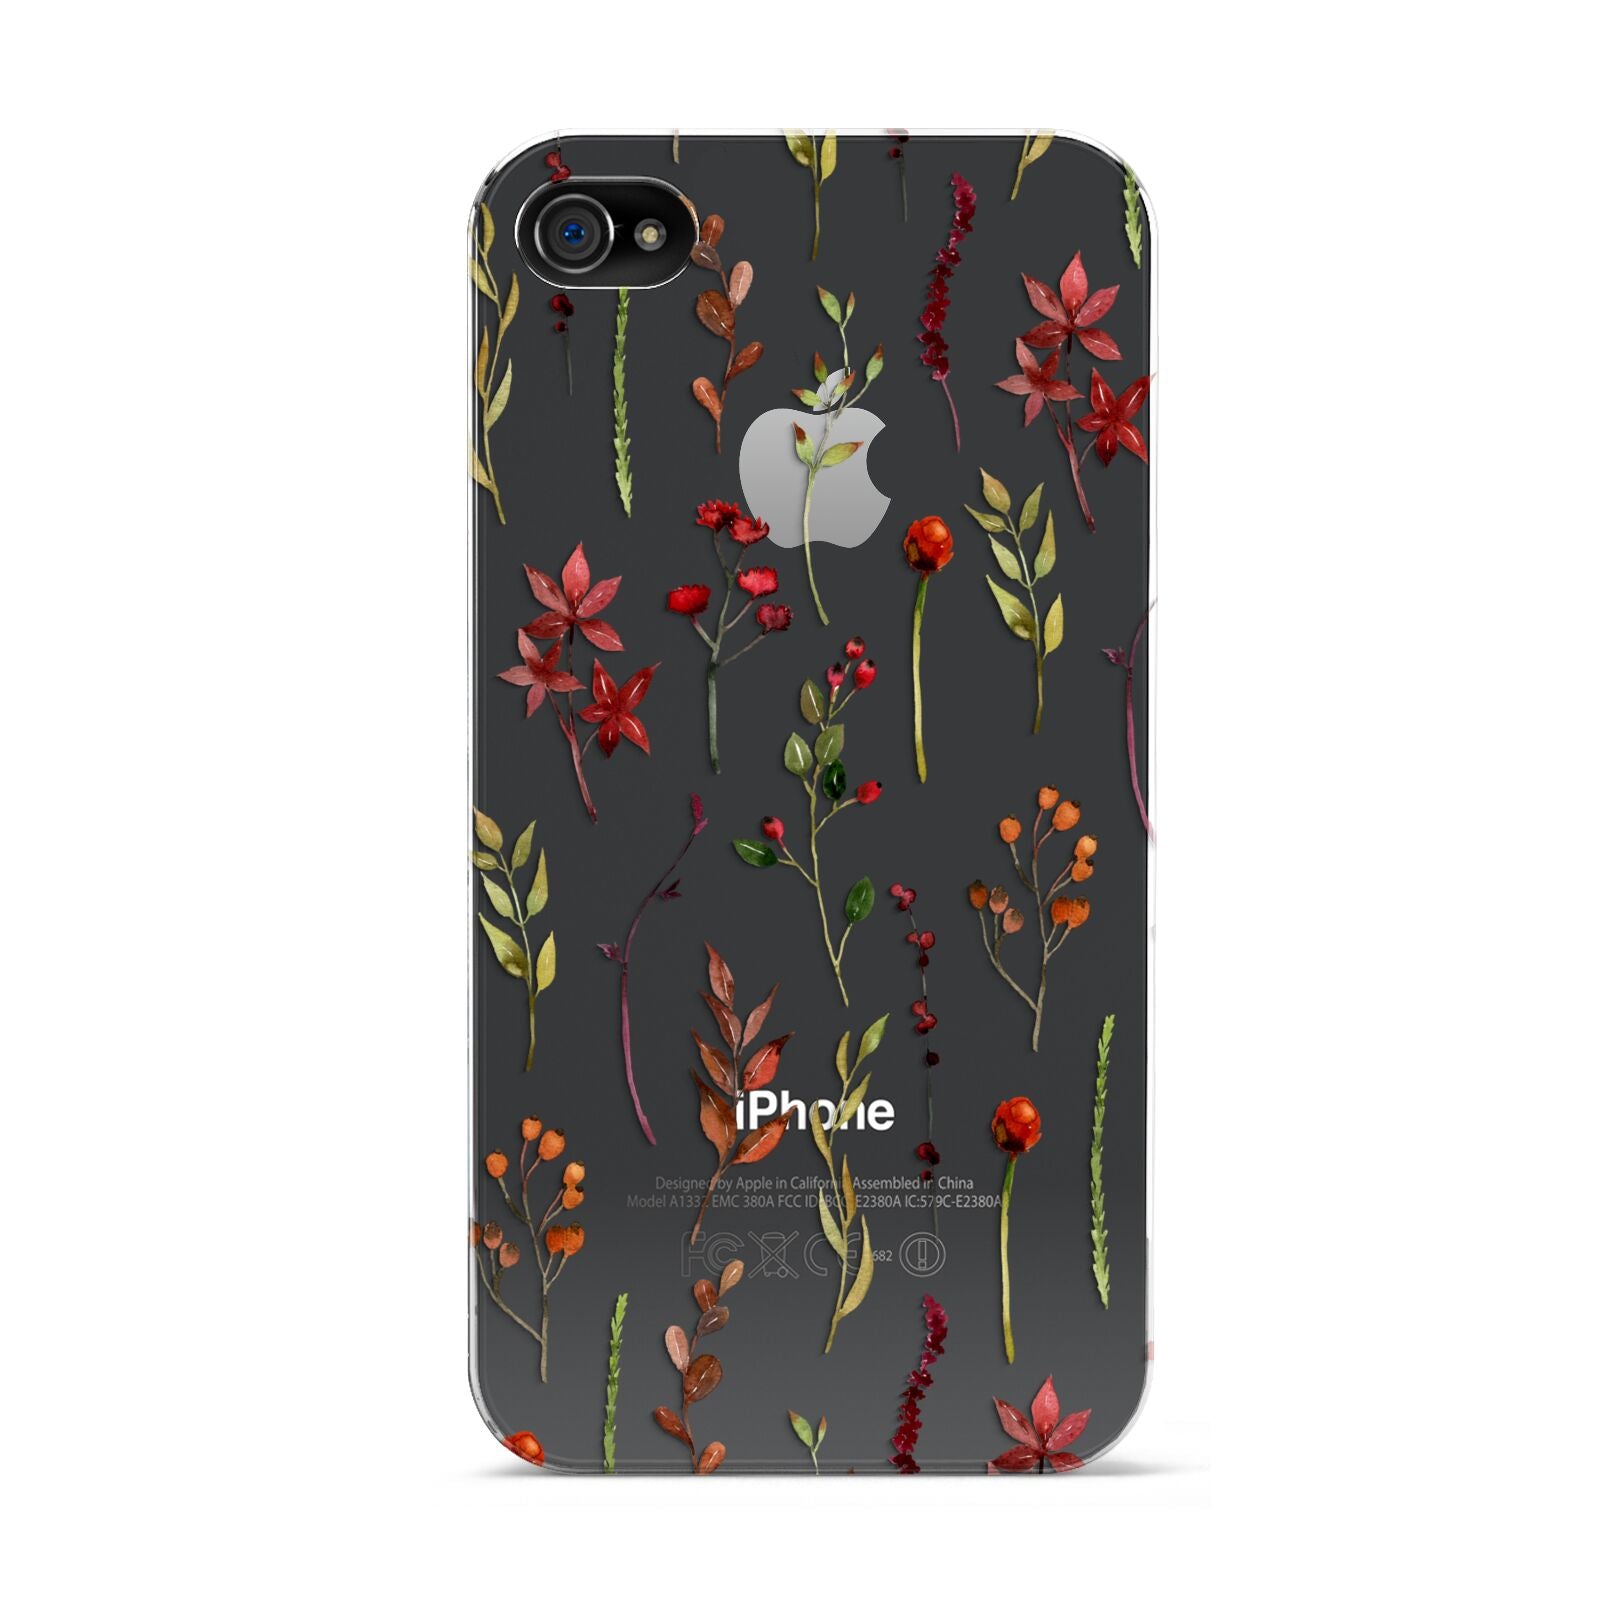 Watercolour Flowers and Foliage Apple iPhone 4s Case